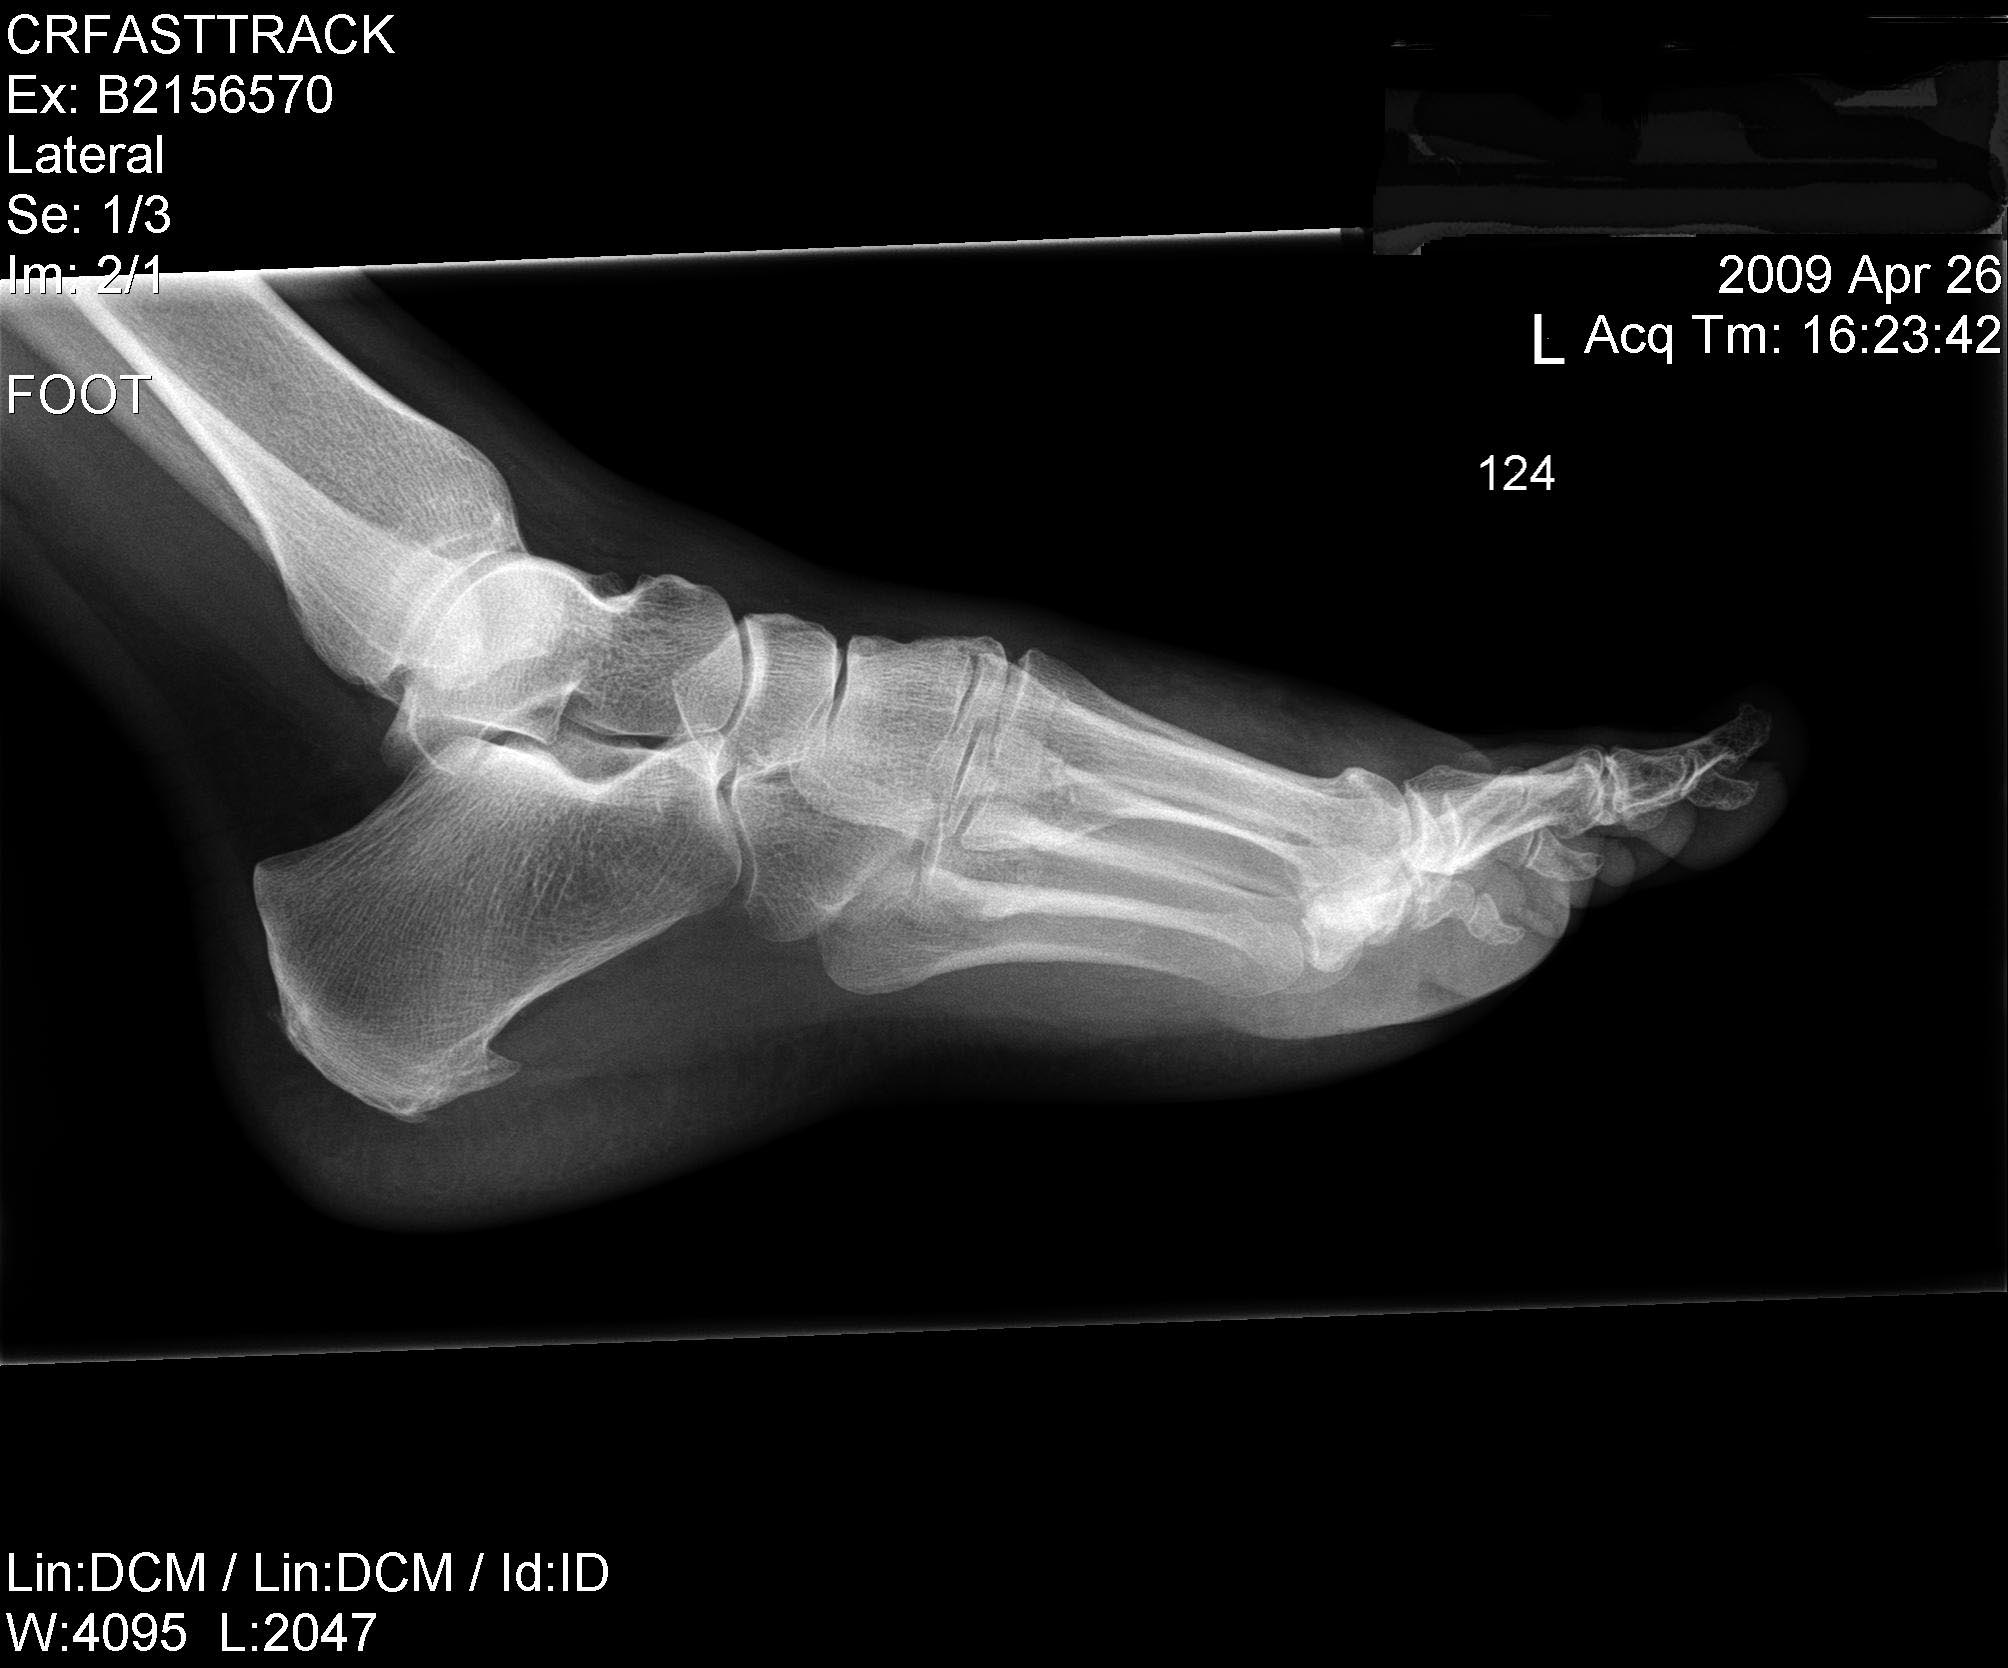 The X-Rays « So You've Got a LISFRANC INJURY!